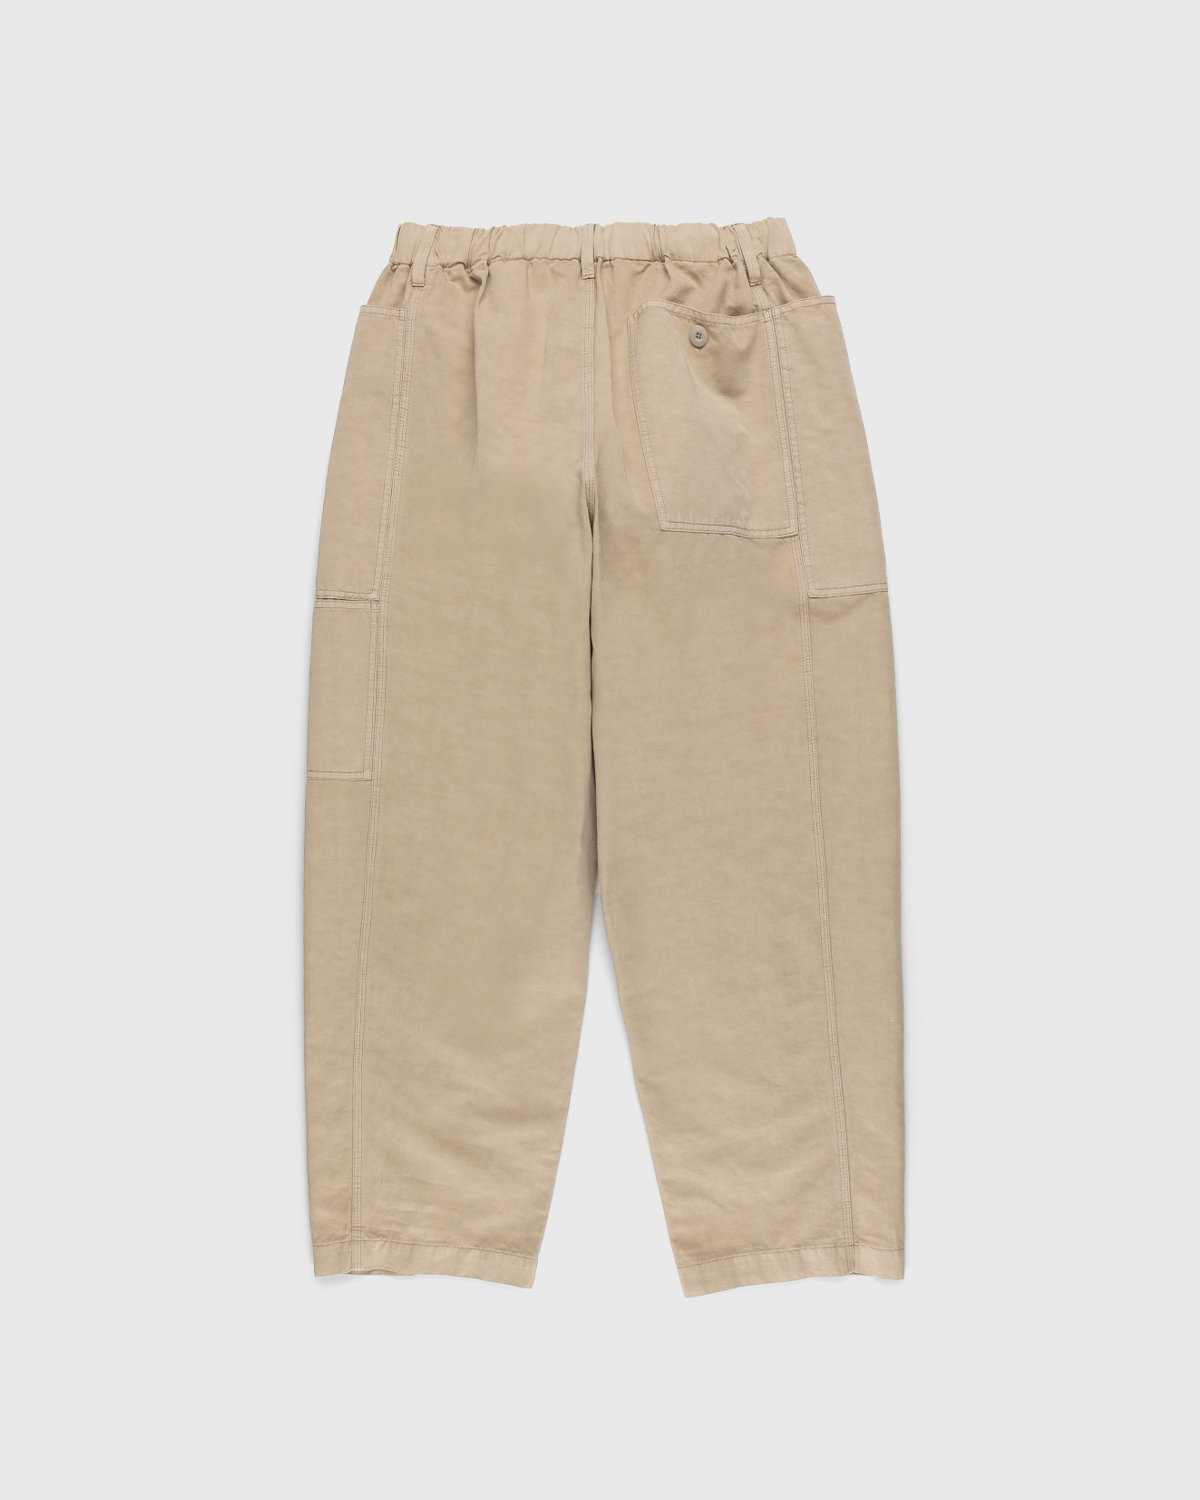 Lemaire - Fatigue Pants Natural Beige - Clothing - Beige - Image 2